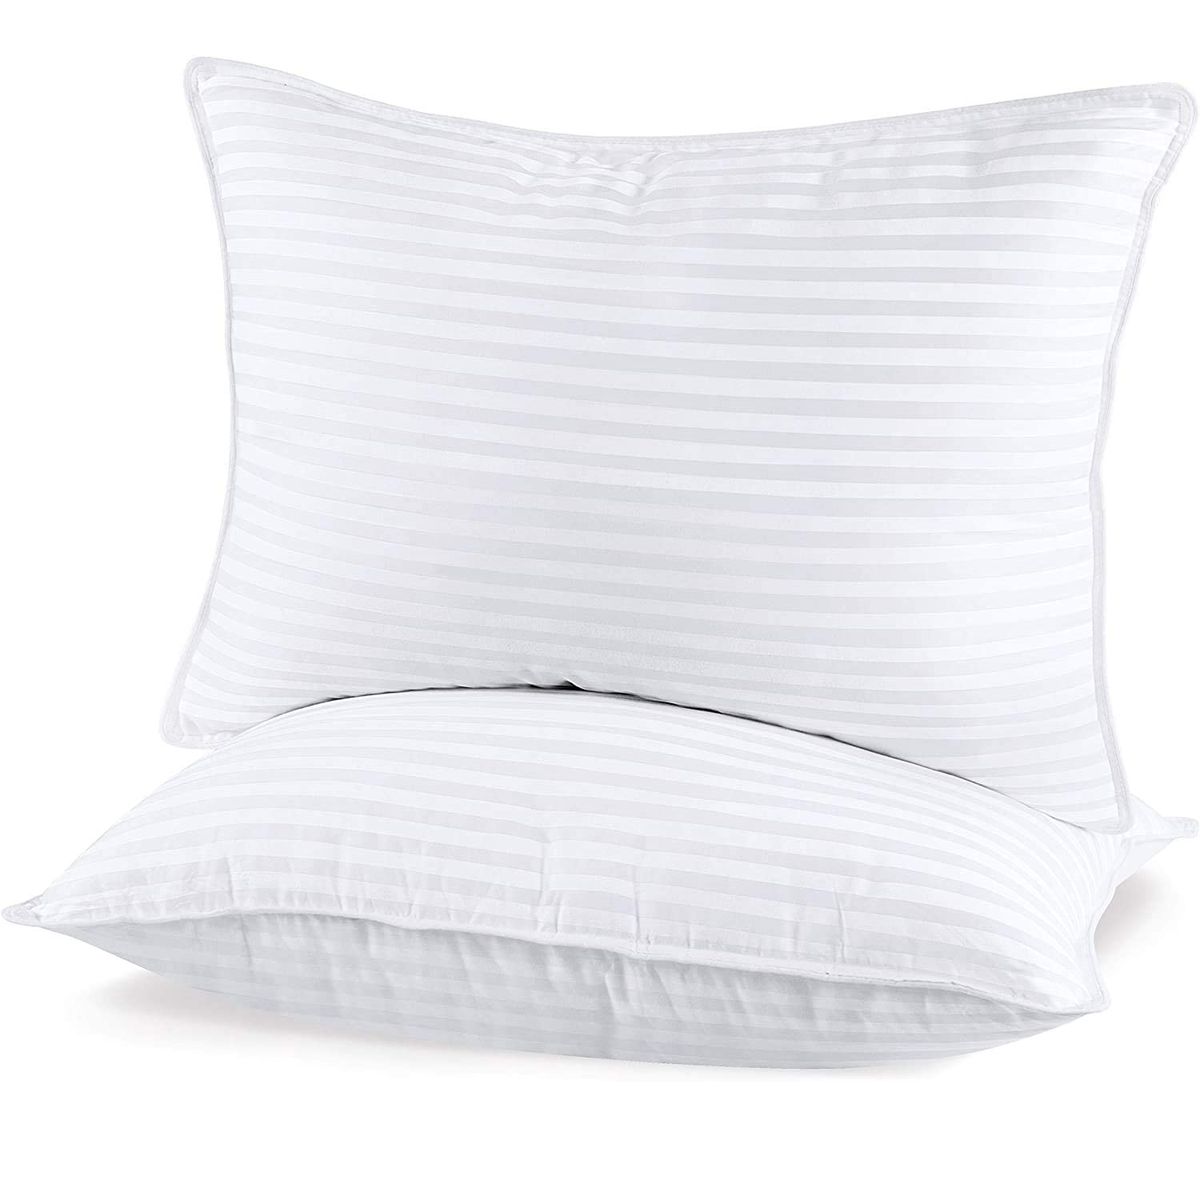 Utopia Bedding Bed Pillows for Sleeping Standard Size, Set of 2,